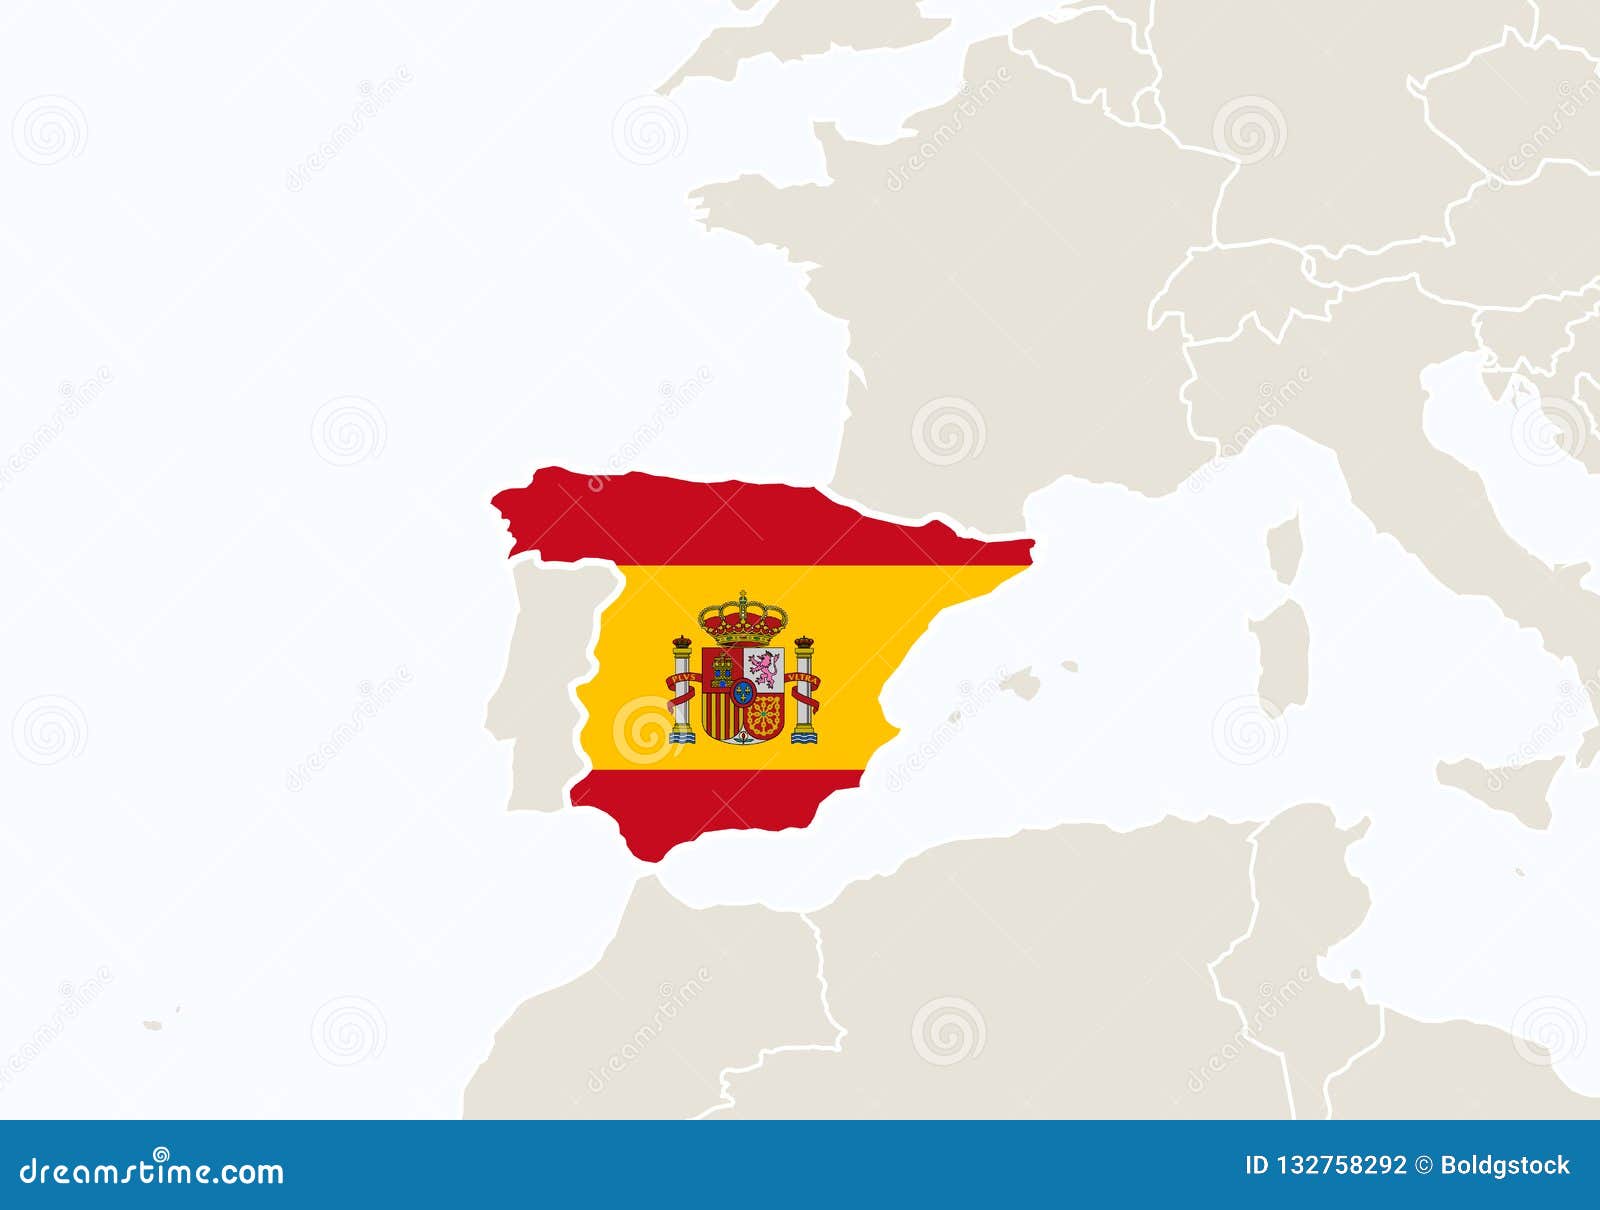 map of europe with spain highlighted Europe With Highlighted Spain Map Stock Vector Illustration Of map of europe with spain highlighted